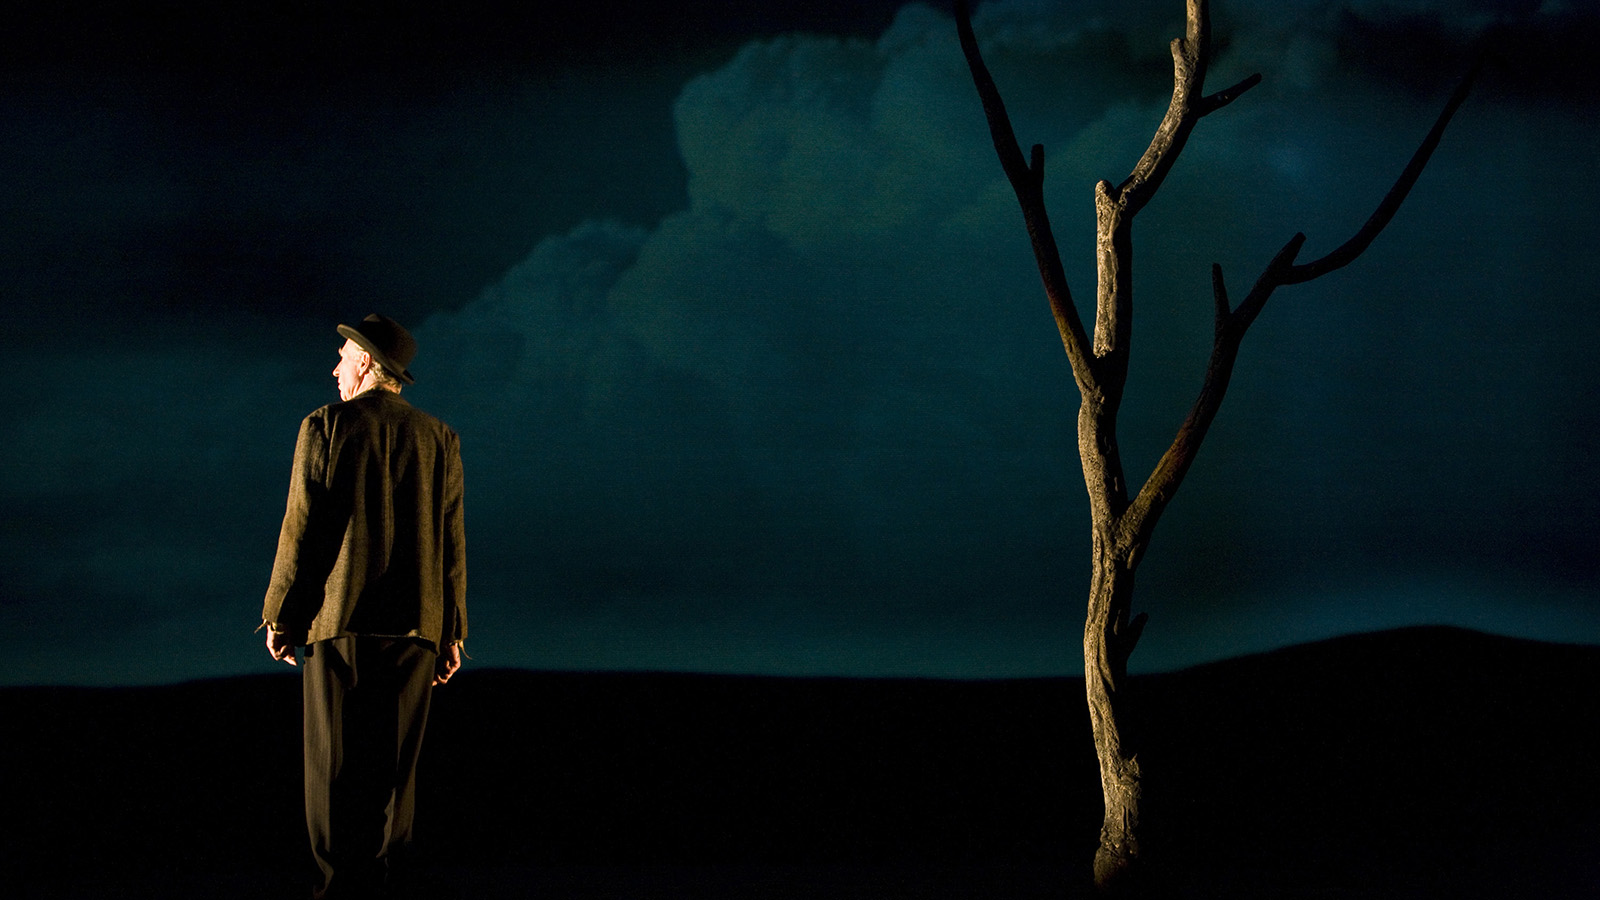 theatre of the absurd in waiting for godot